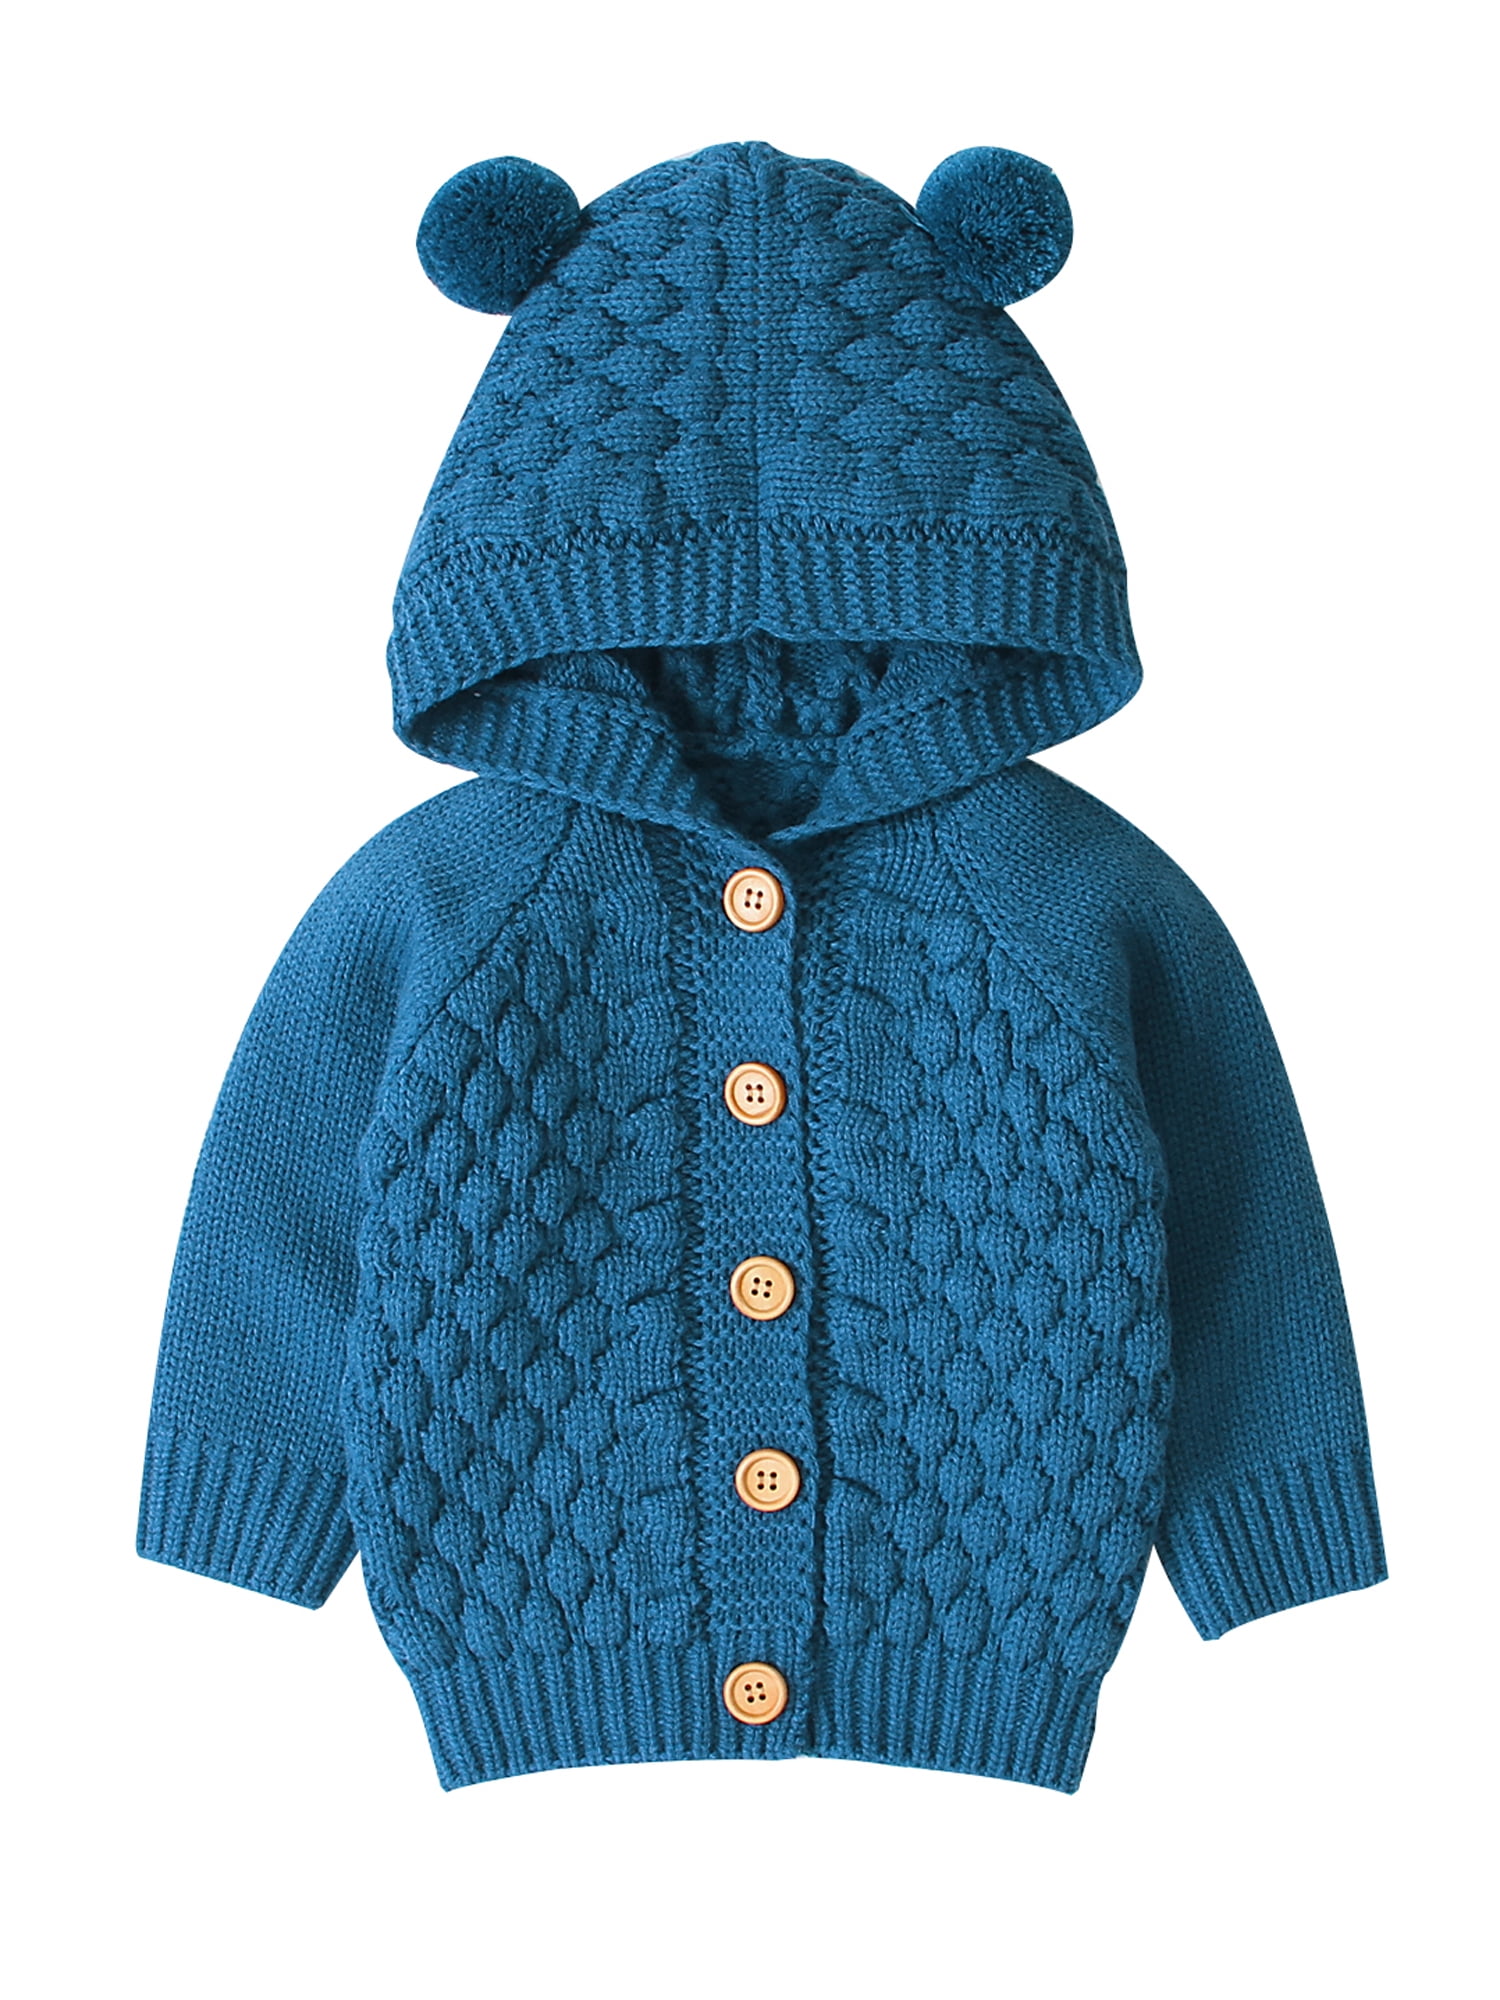 Baby Solid Hooded Sweater Newborn Infant Girl Boy Winter Warm Coat Knit Outwear Three Dimensional Ball Jacket,Soft Comfortable Clothes Suitable for 0-24 Months 